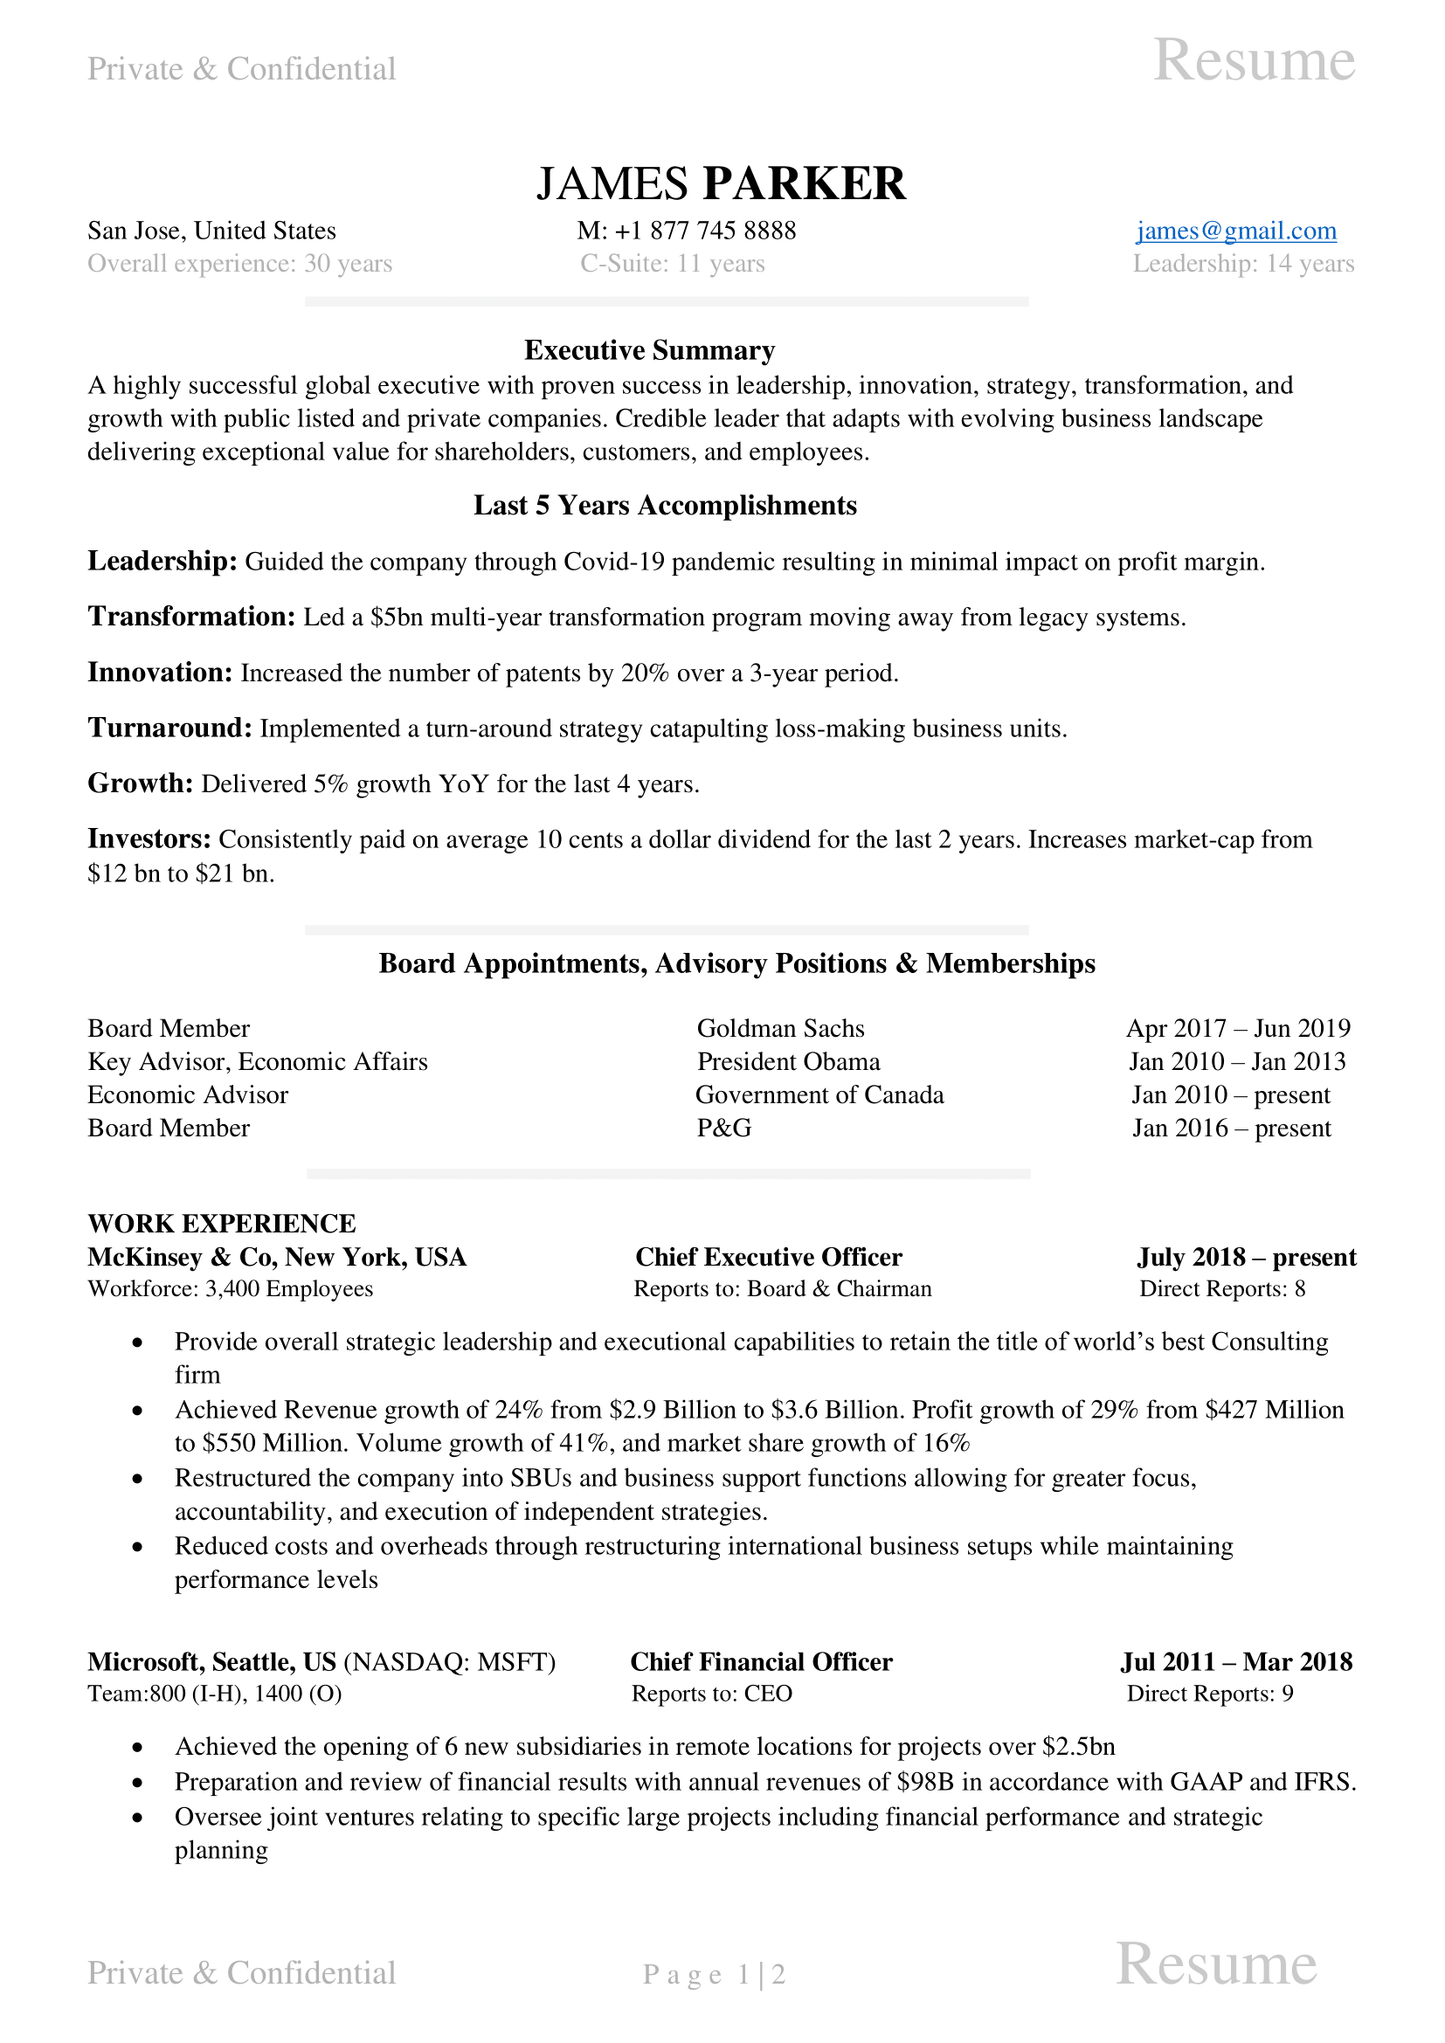 Executive Resume Template PRO V5 - Chief Technology Officer, Board Member